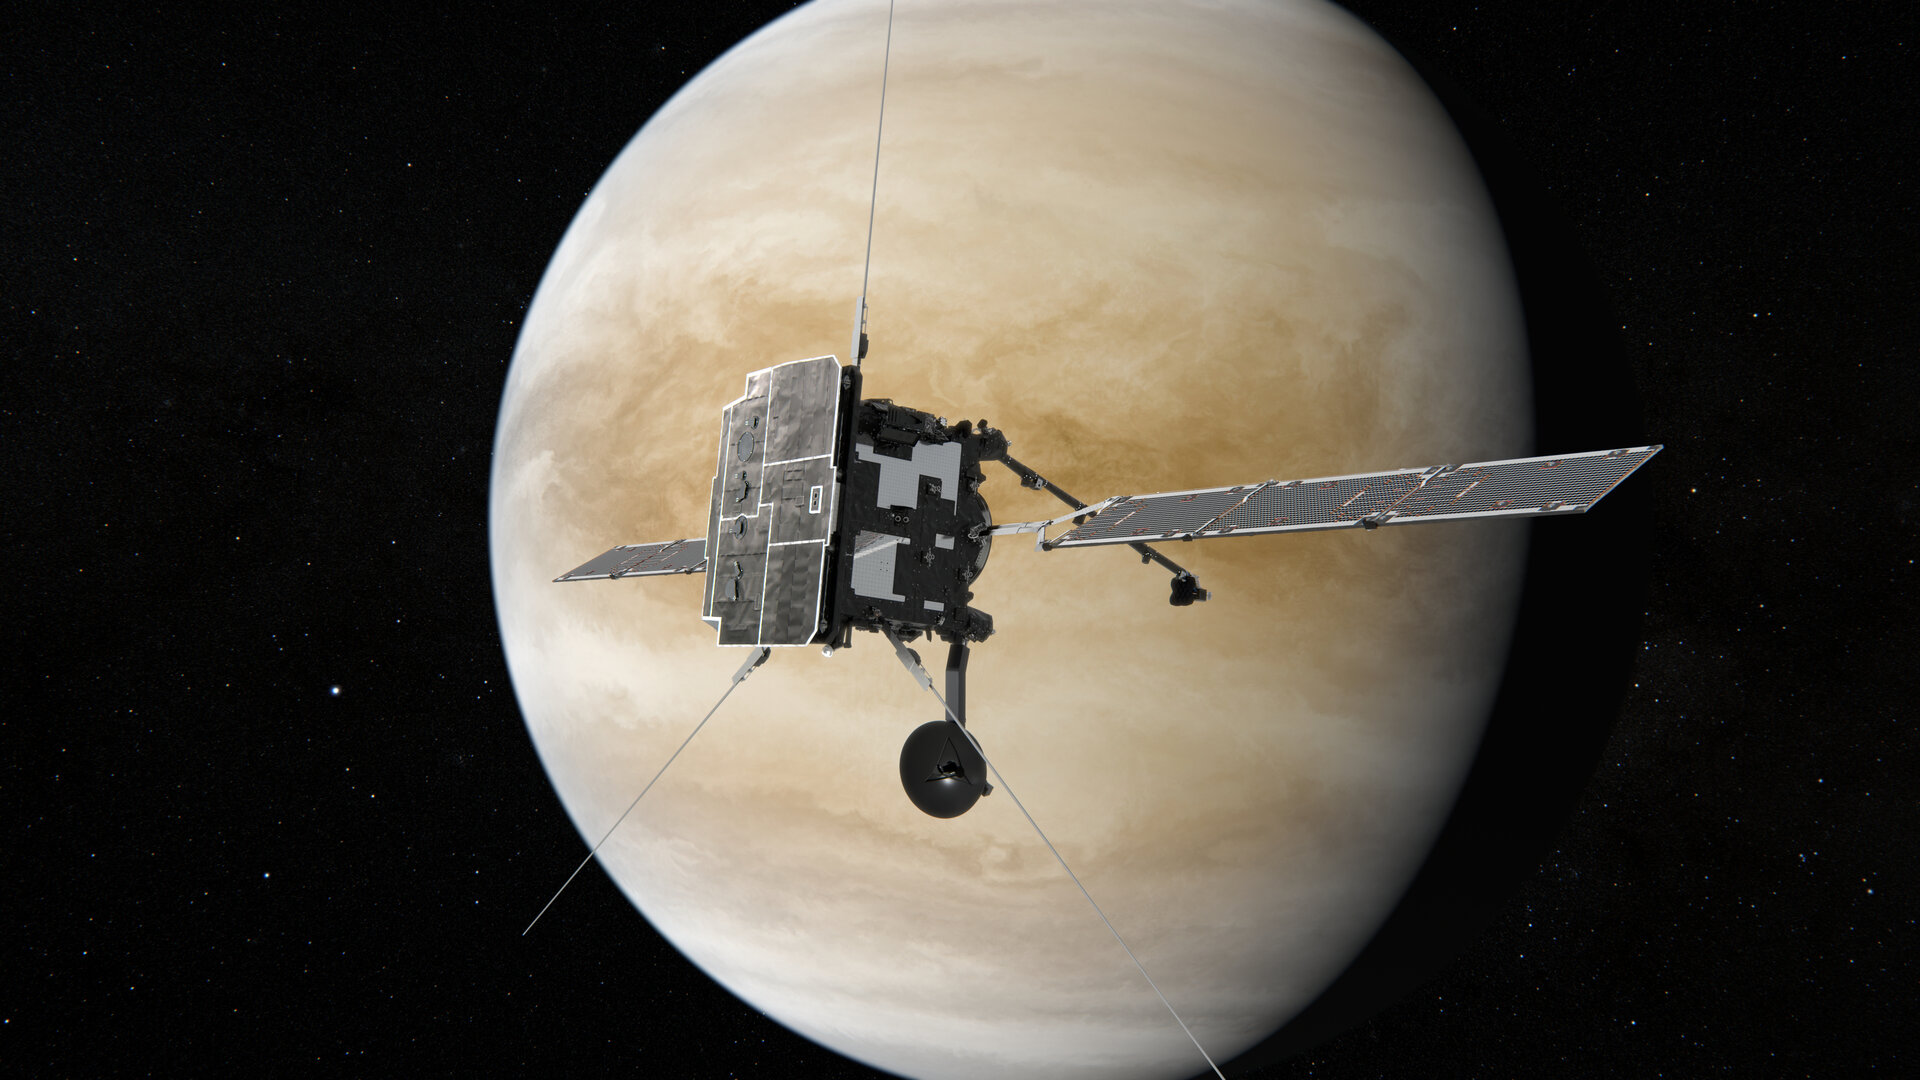 The Recent Picture & Videos from the Double Venus Flyby